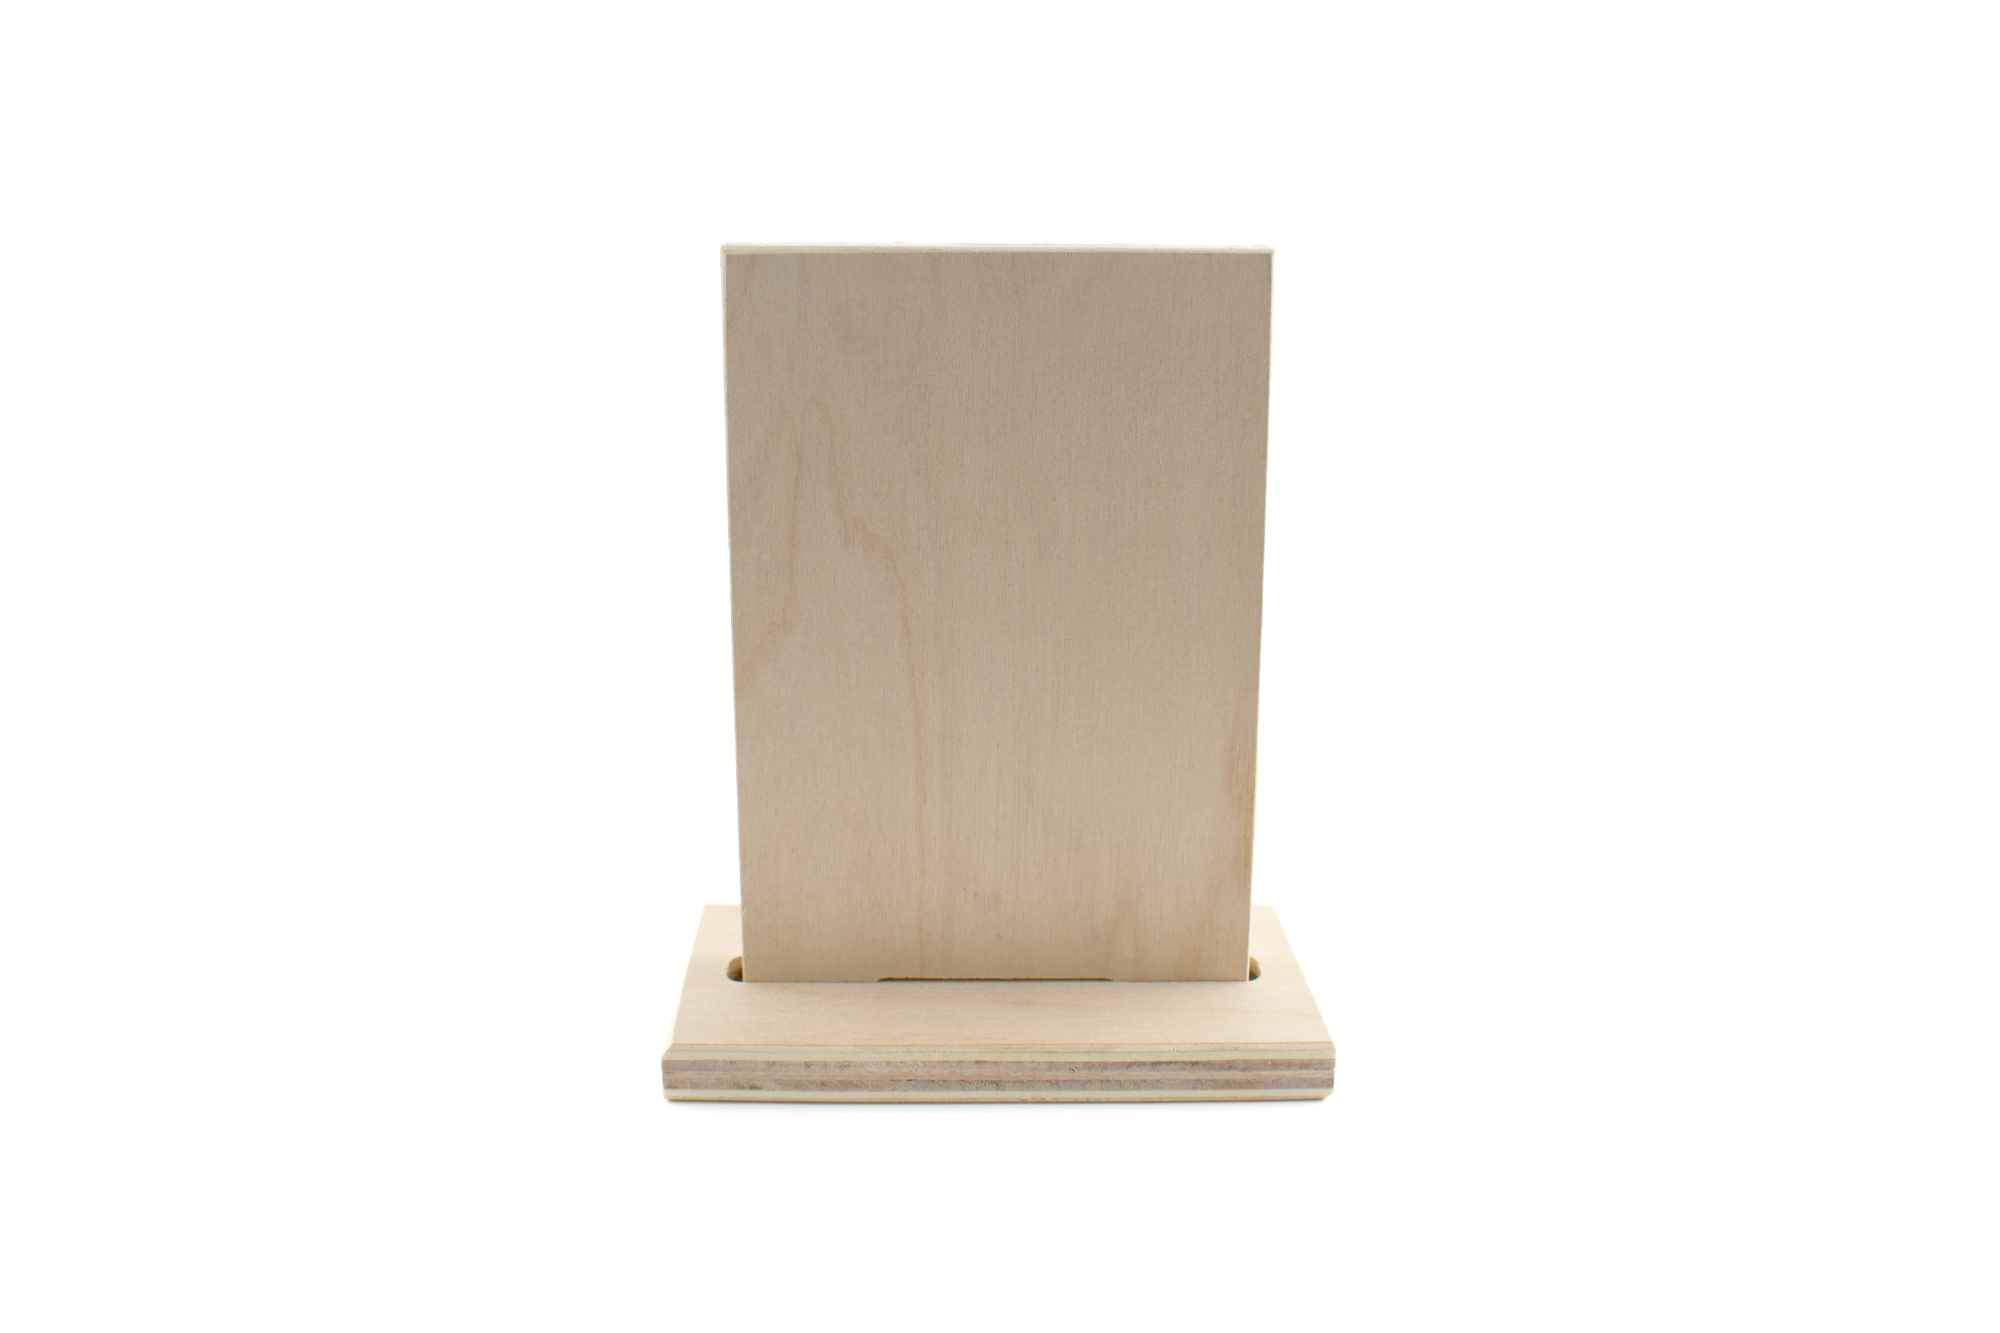 Square wood QR code stand with square base